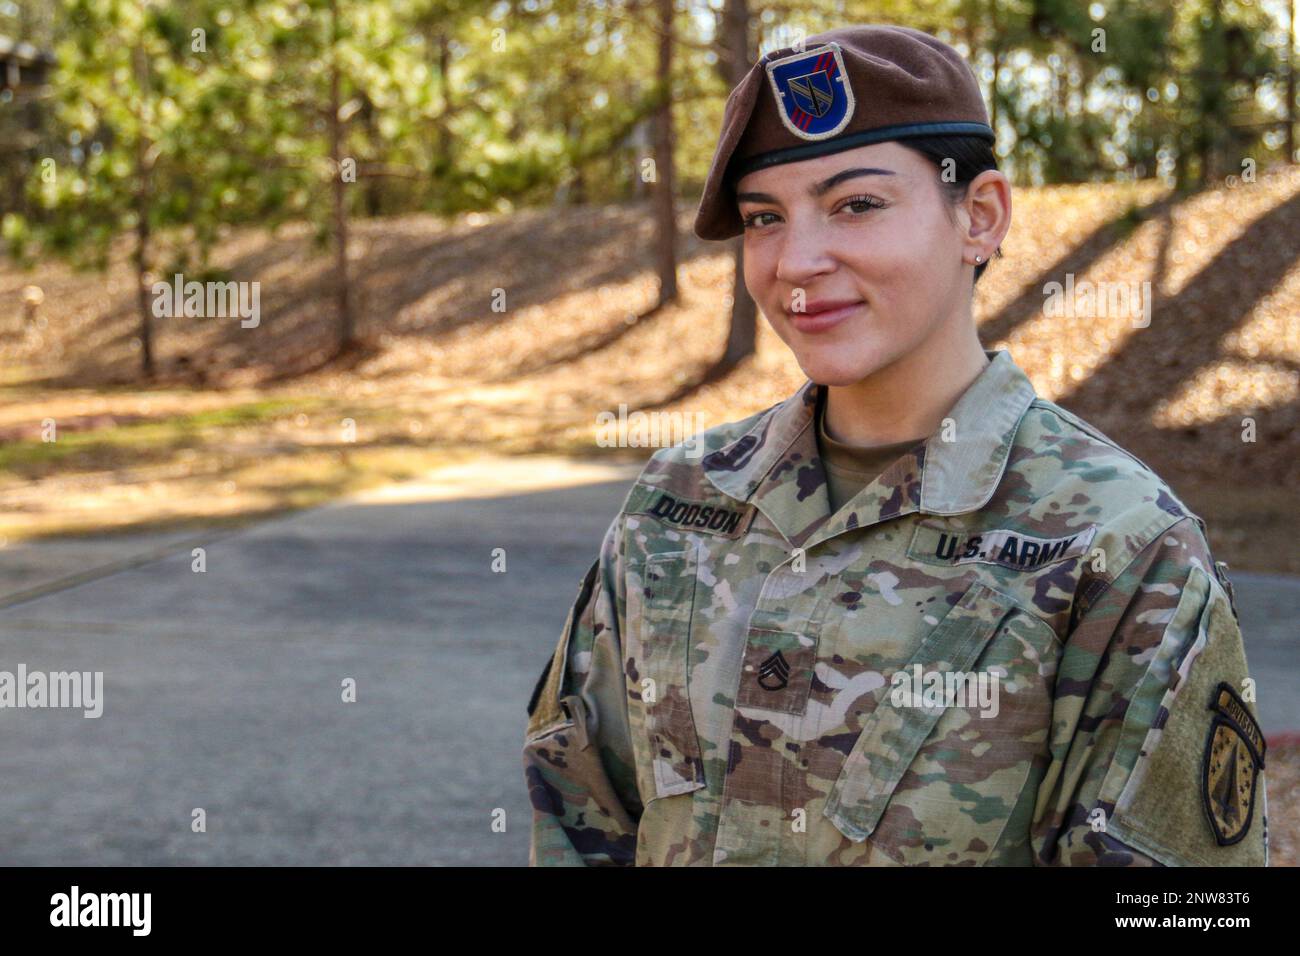 Staff Sgt. Julia Dodson, an intelligence advisor assigned to 6th Battalion, 1st Security Force Assistance Brigade, poses for a photo, Jan. 24, at Fort Benning, Ga.     “I had my first deployment in 2017, and we were partnered with the Iraqi Border Patrol. So, I gained some experience on what it means to be an advisor and to work with [a] foreign partner force. It was very rewarding. I had a friend in the SFAB who told me about his similar experience to mine and I felt like it was a good opportunity for me to continue to have those experiences.”    U.S. Army photo by Maj. Jason Elmore Stock Photo